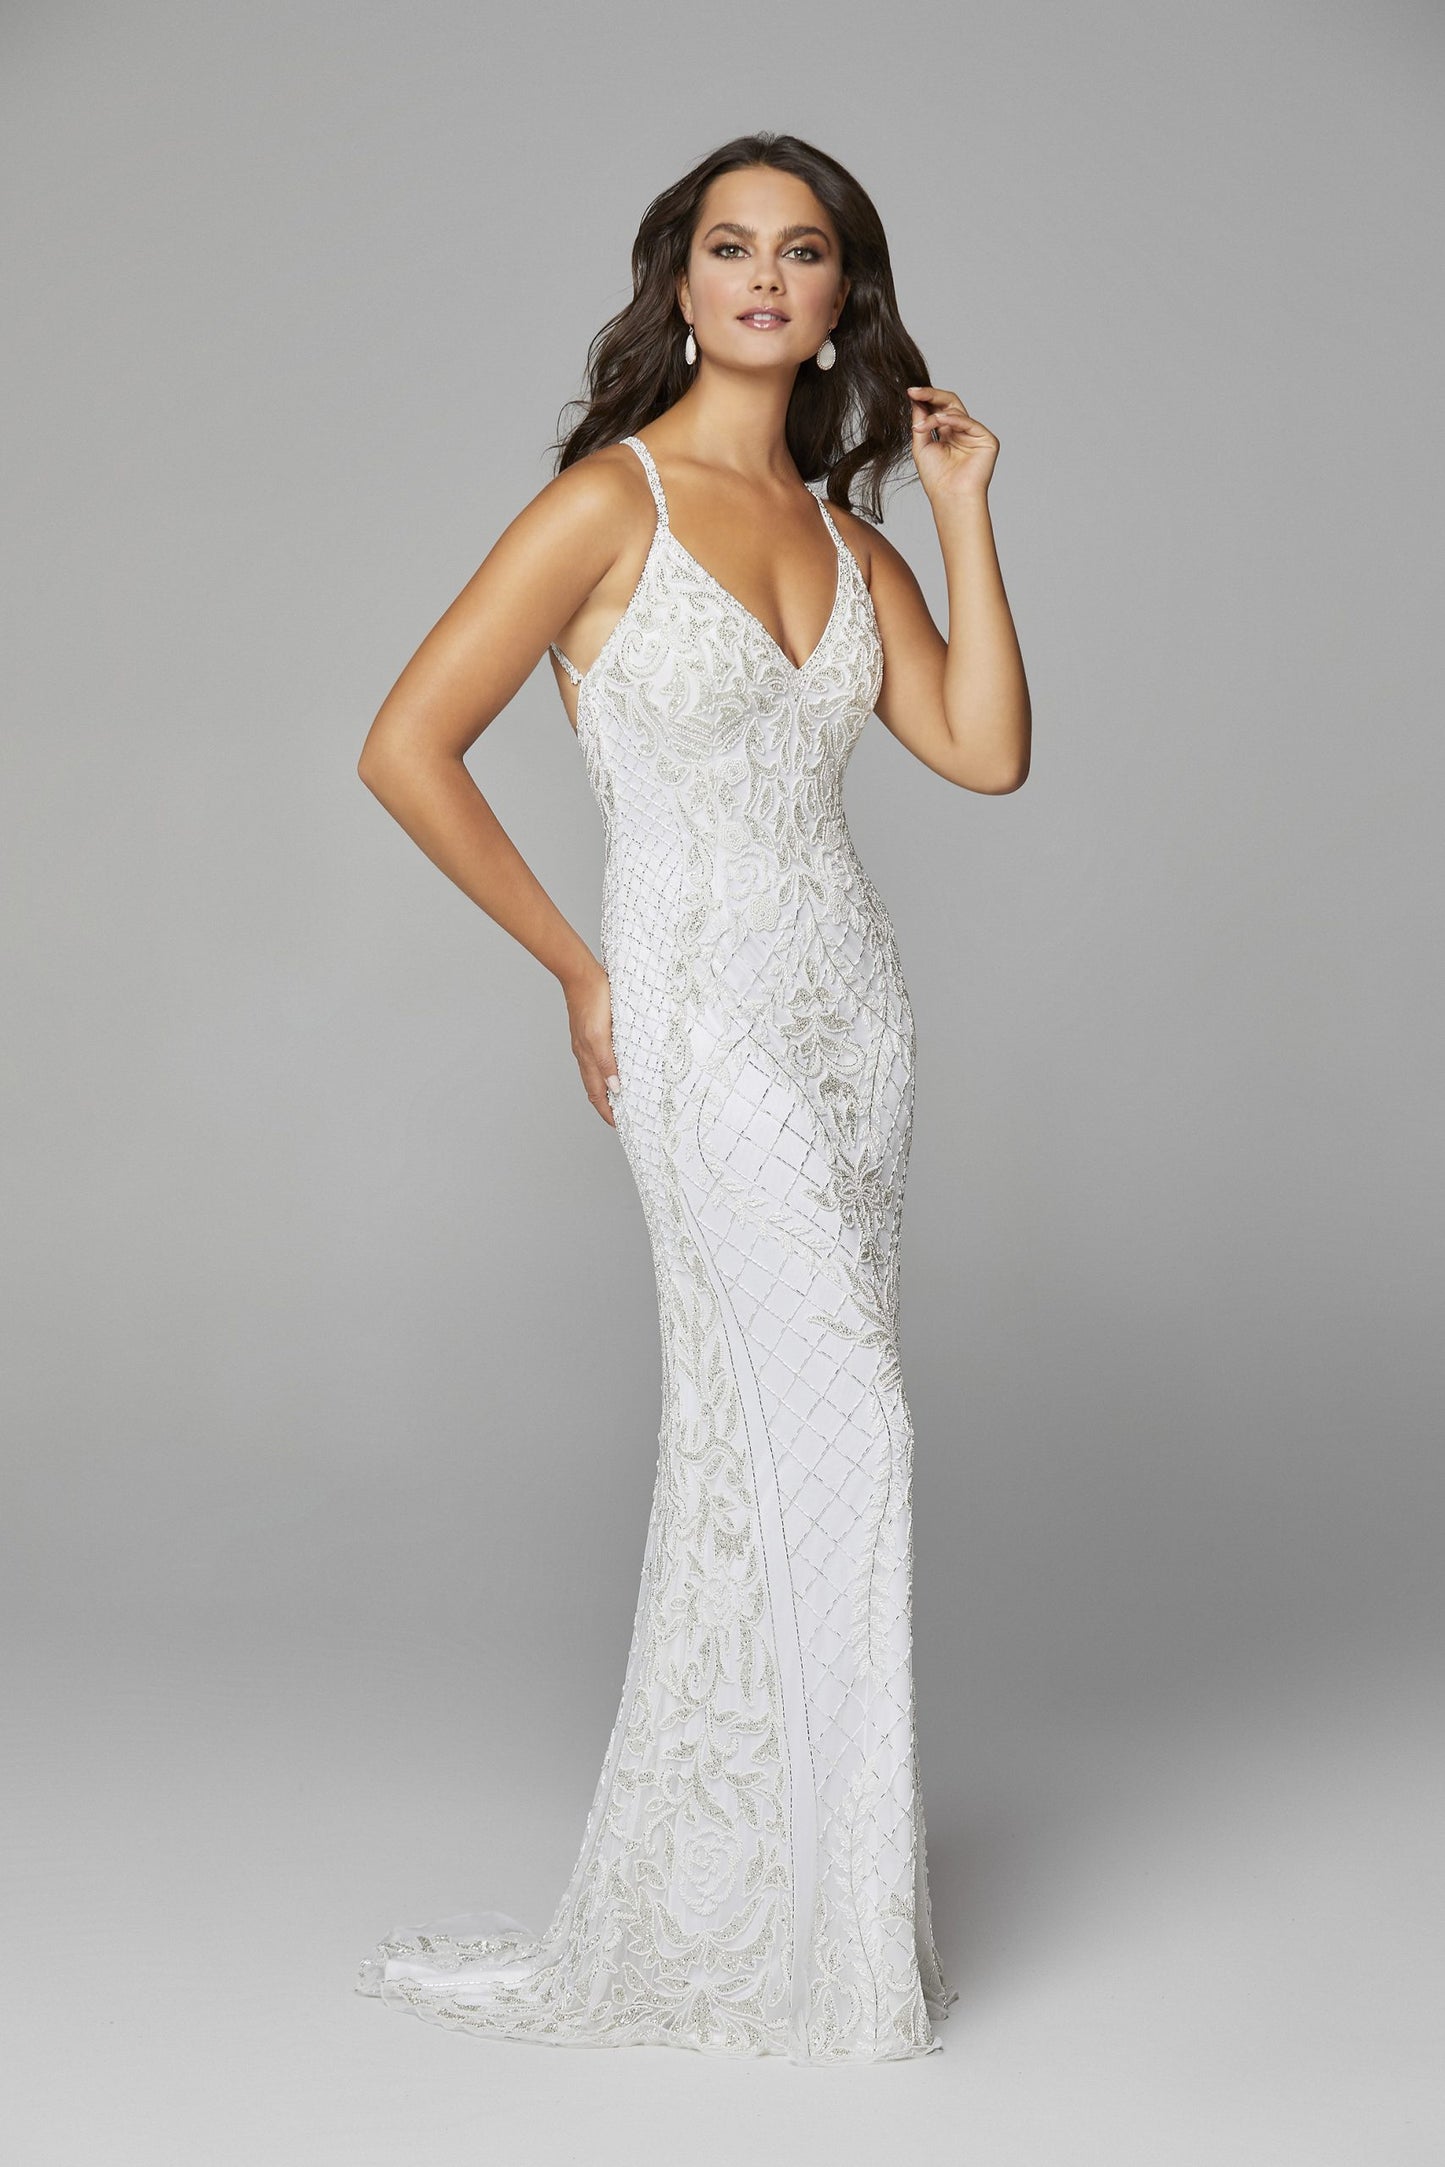 Primavera Couture 3428 is a beaded Prom Dress, Pageant Gown, Wedding Dress & Formal Evening Wear gown. This Gown Features a v neckline with spaghetti straps that criss cross in the open back full long sequin and bead skirt.   Available colors:  Ivory  Available sizes:  8, 12